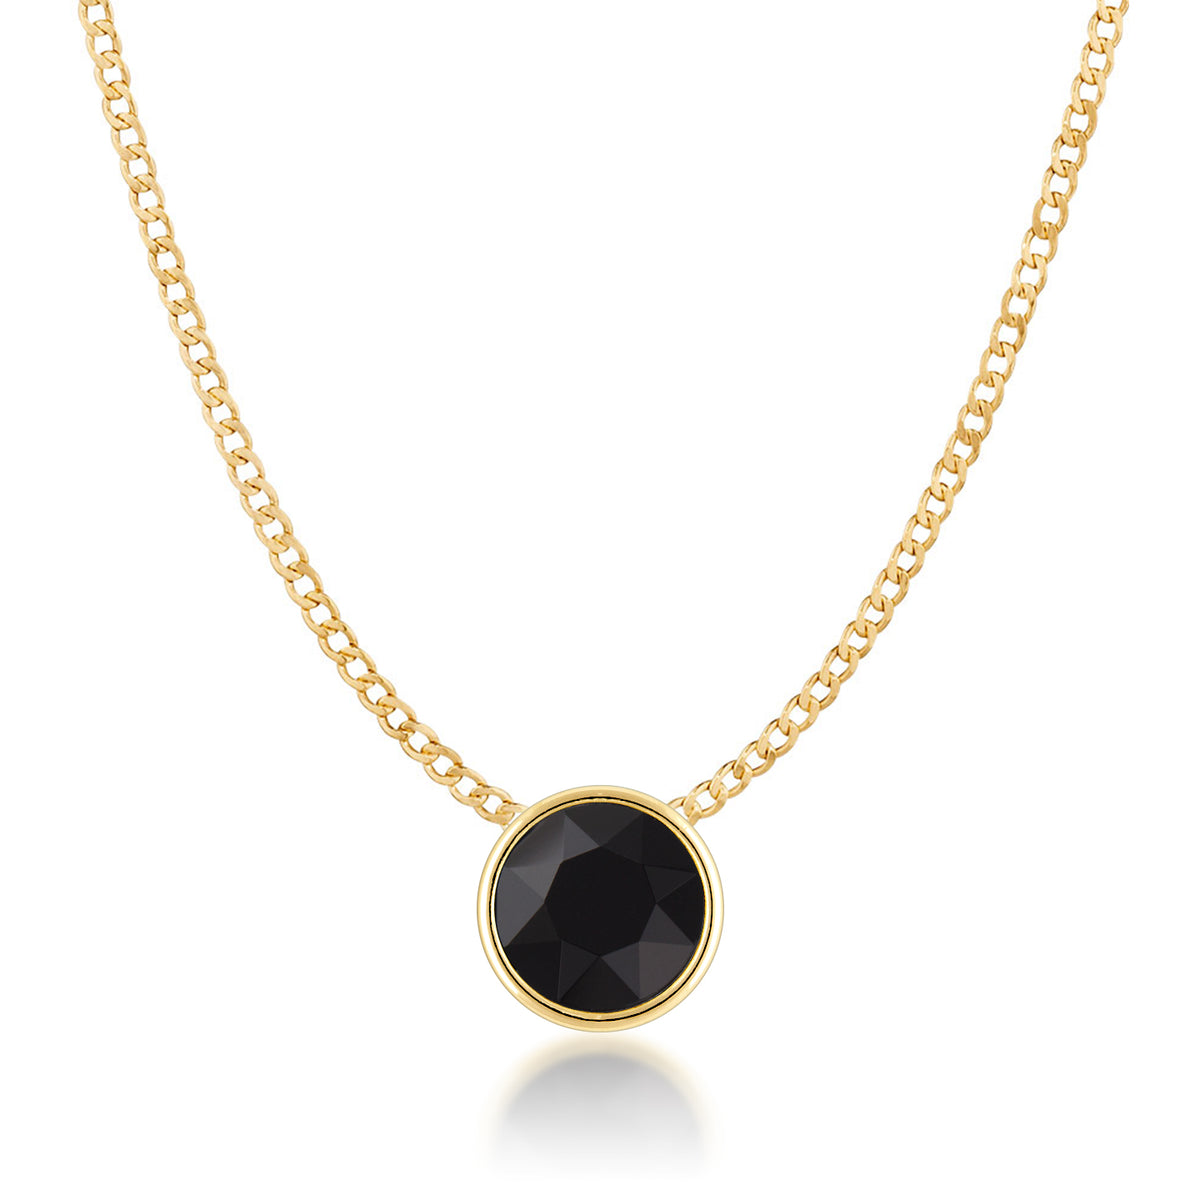 Harley Small Pendant Necklace with Black Jet Round Crystals from Swarovski Gold Plated - Ed Heart